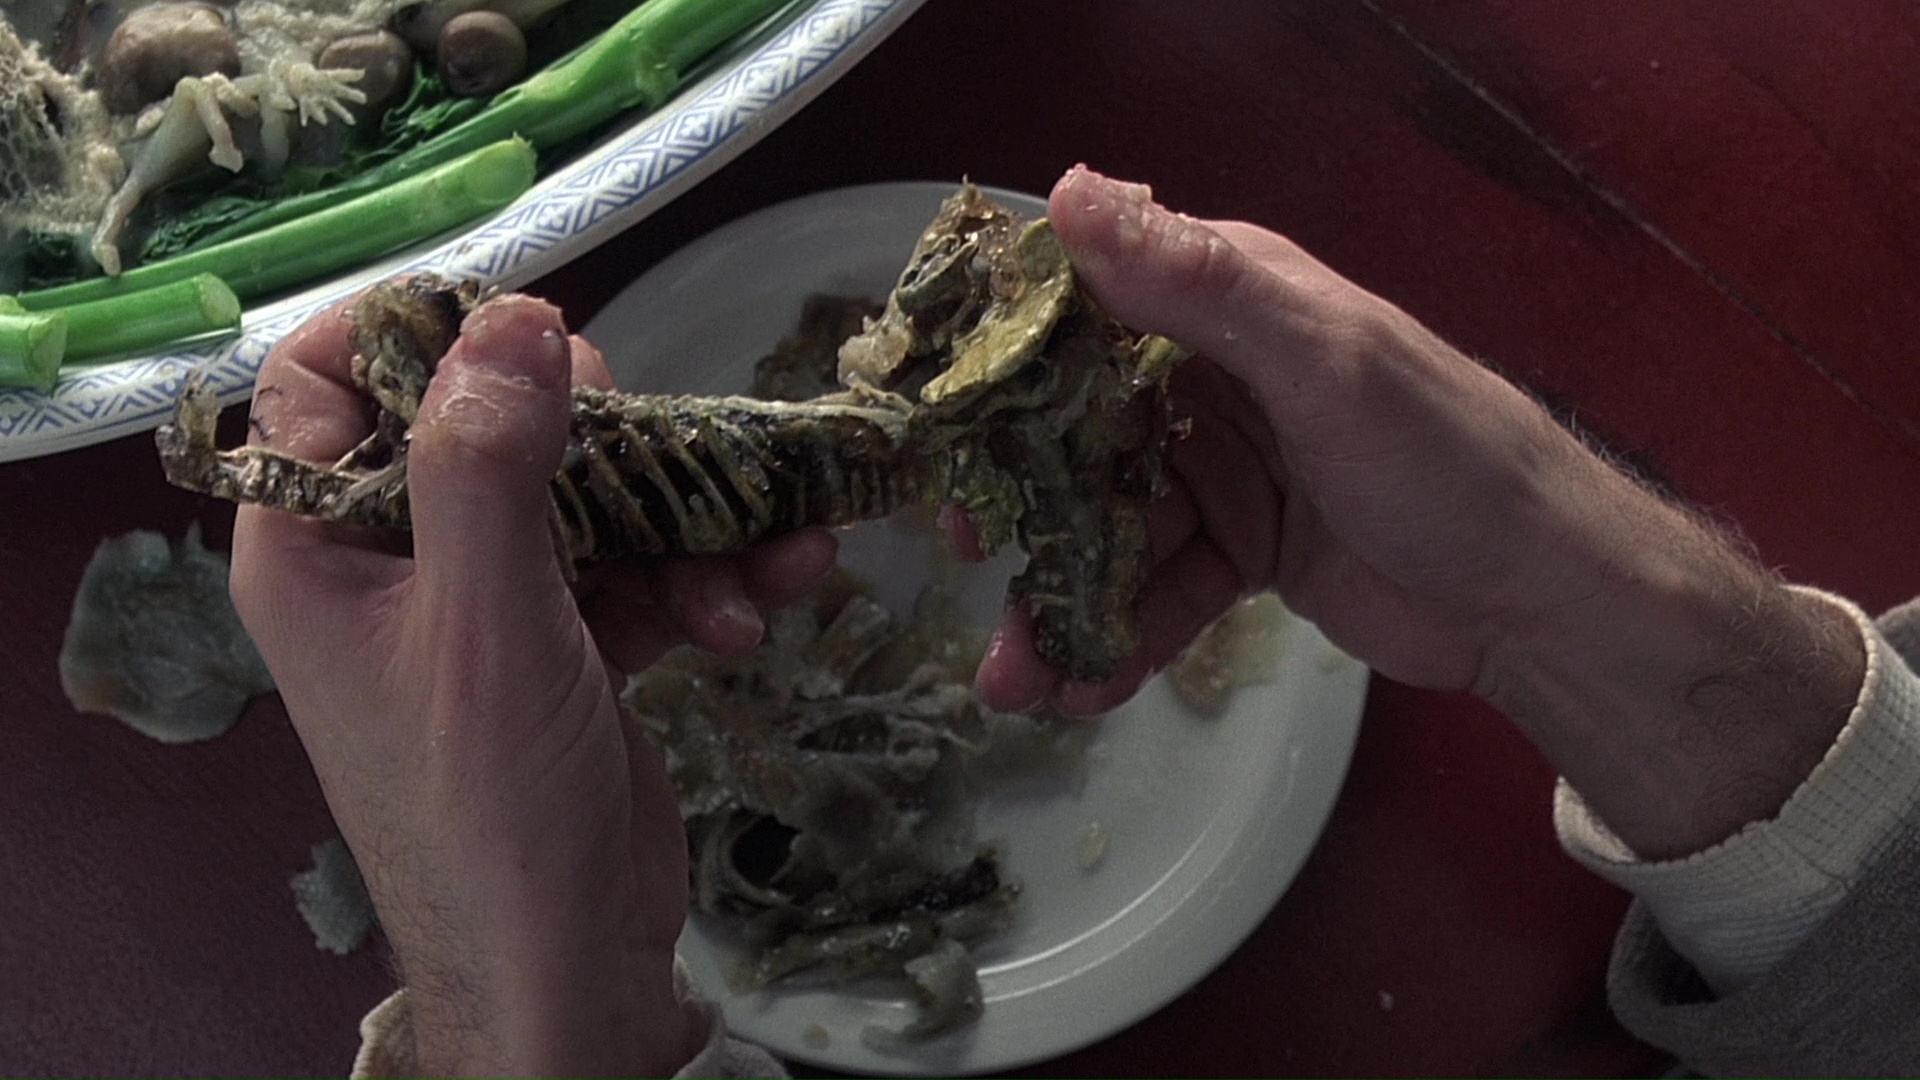 Two white hands holding a small carcass over a dinner plate as pieces of meat fall to plate below. A serving platted of other meats on a bed of greens is in the top corner. 